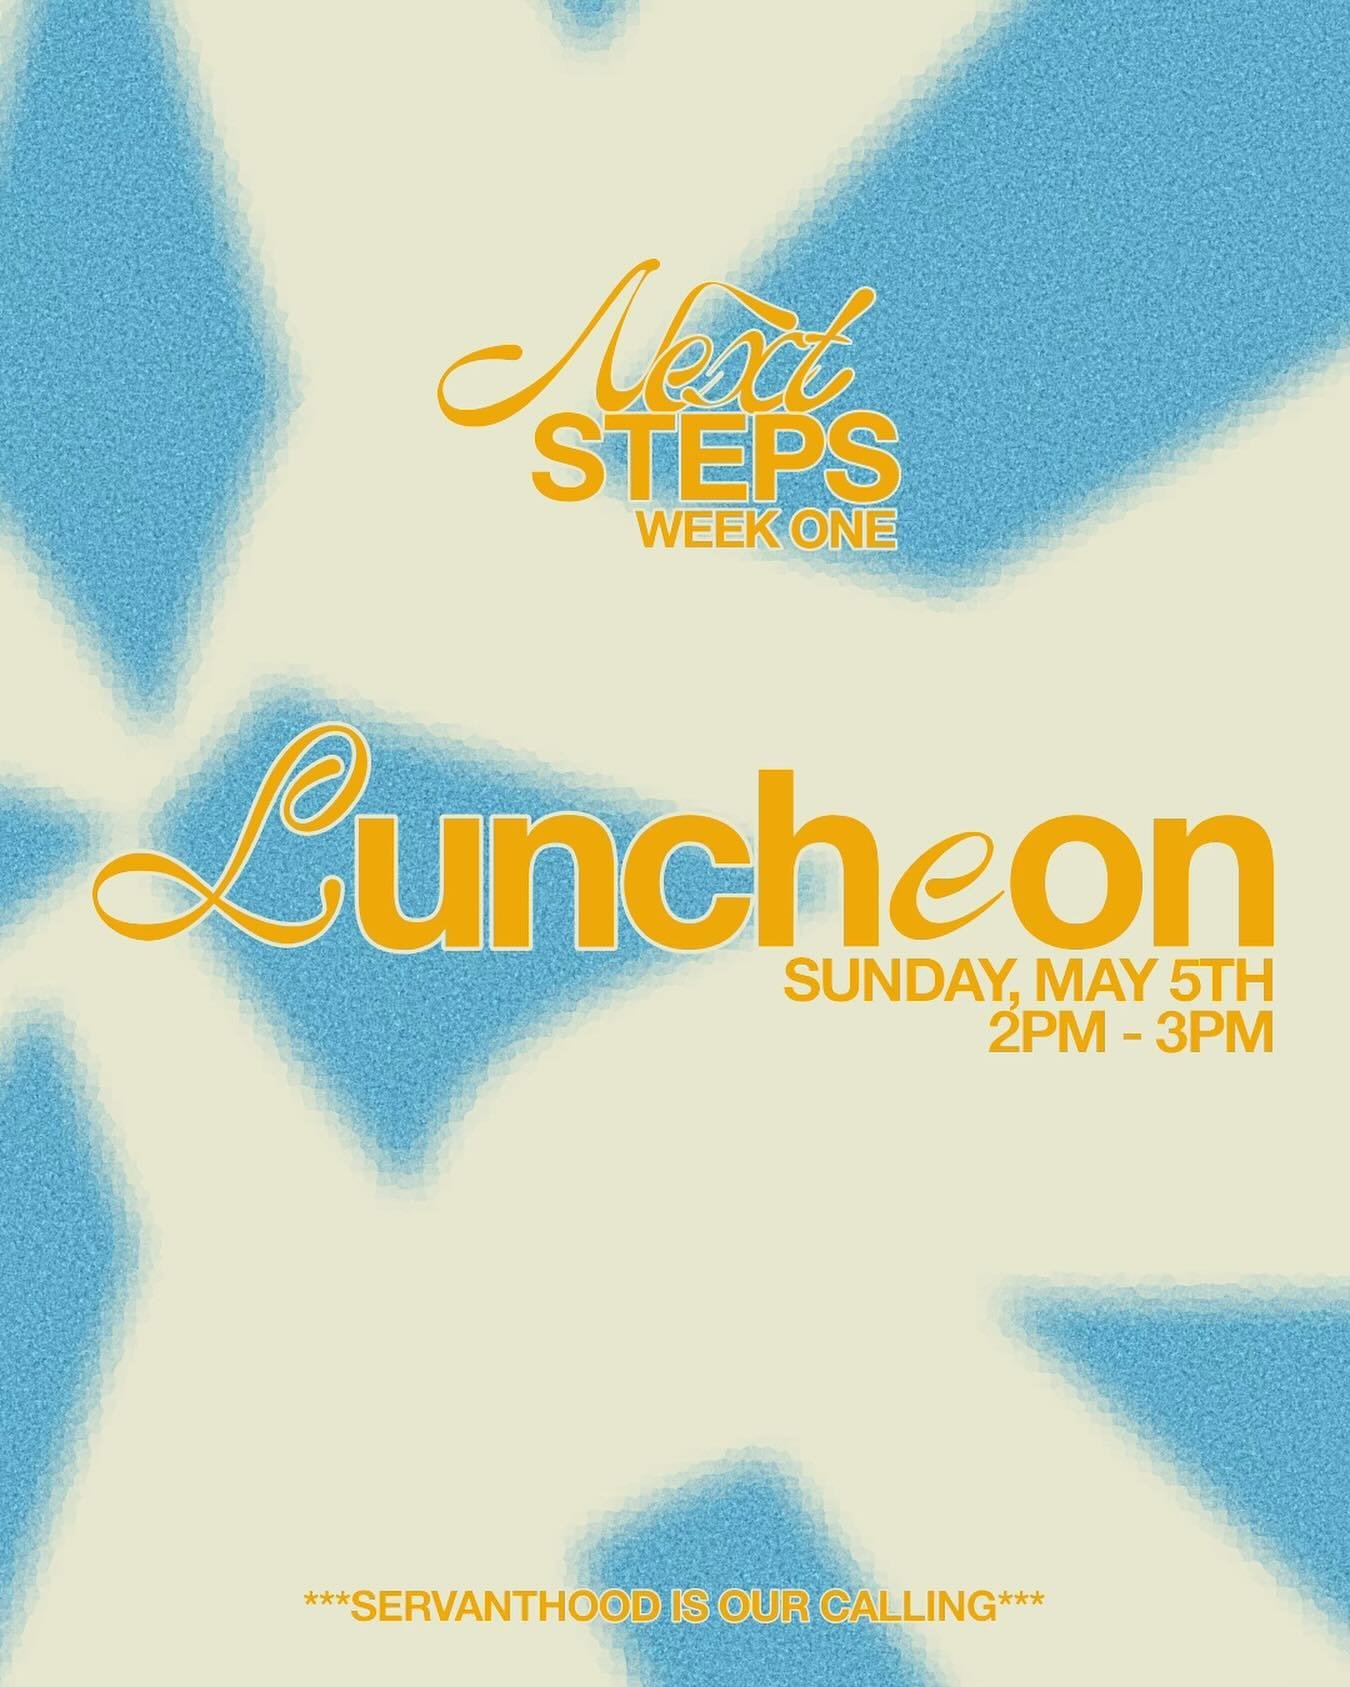 Tomorrow is the best day of the week and you can&rsquo;t miss out!

First time guests, we have something special happening! Join us from 2pm to 3pm for lunch as we get to connect more with you!

We can&rsquo;t wait to see you in the room for the 10am